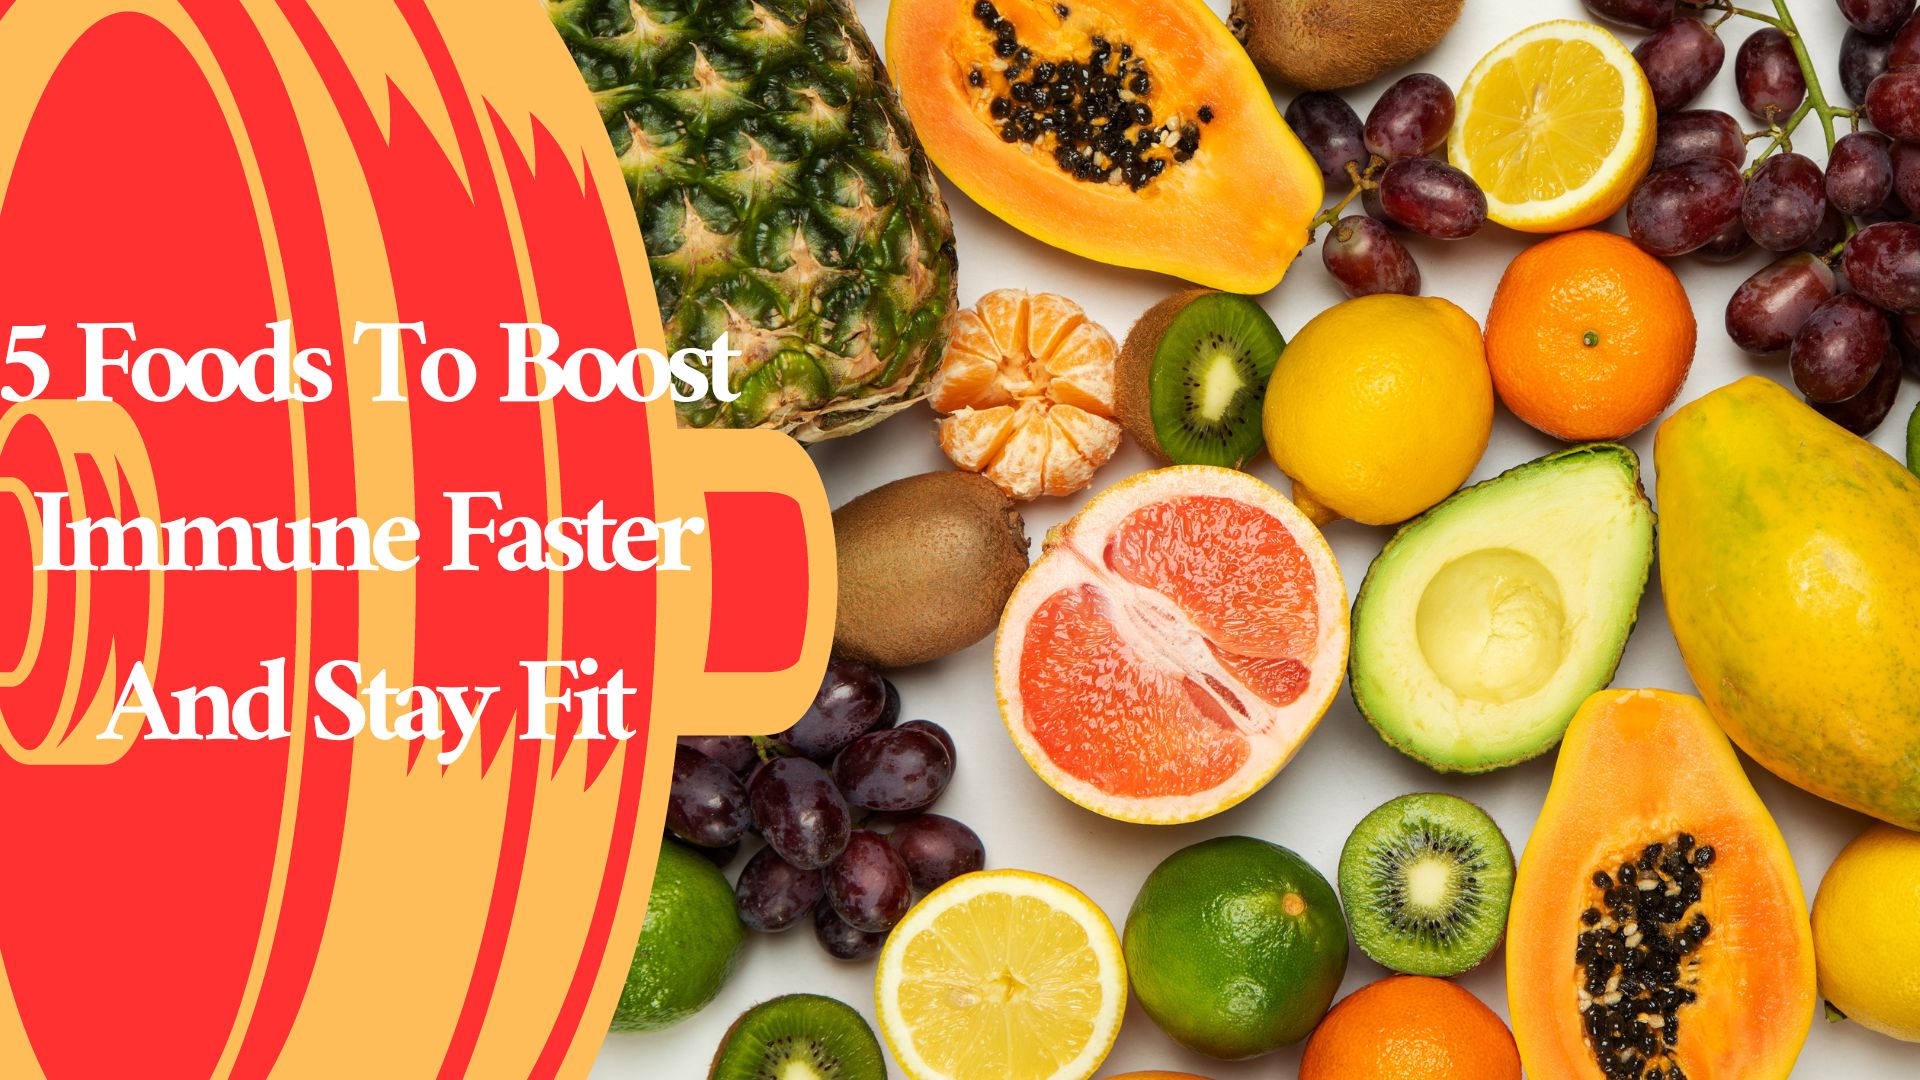 5 Foods To Boost Immune Faster And Stay Fit